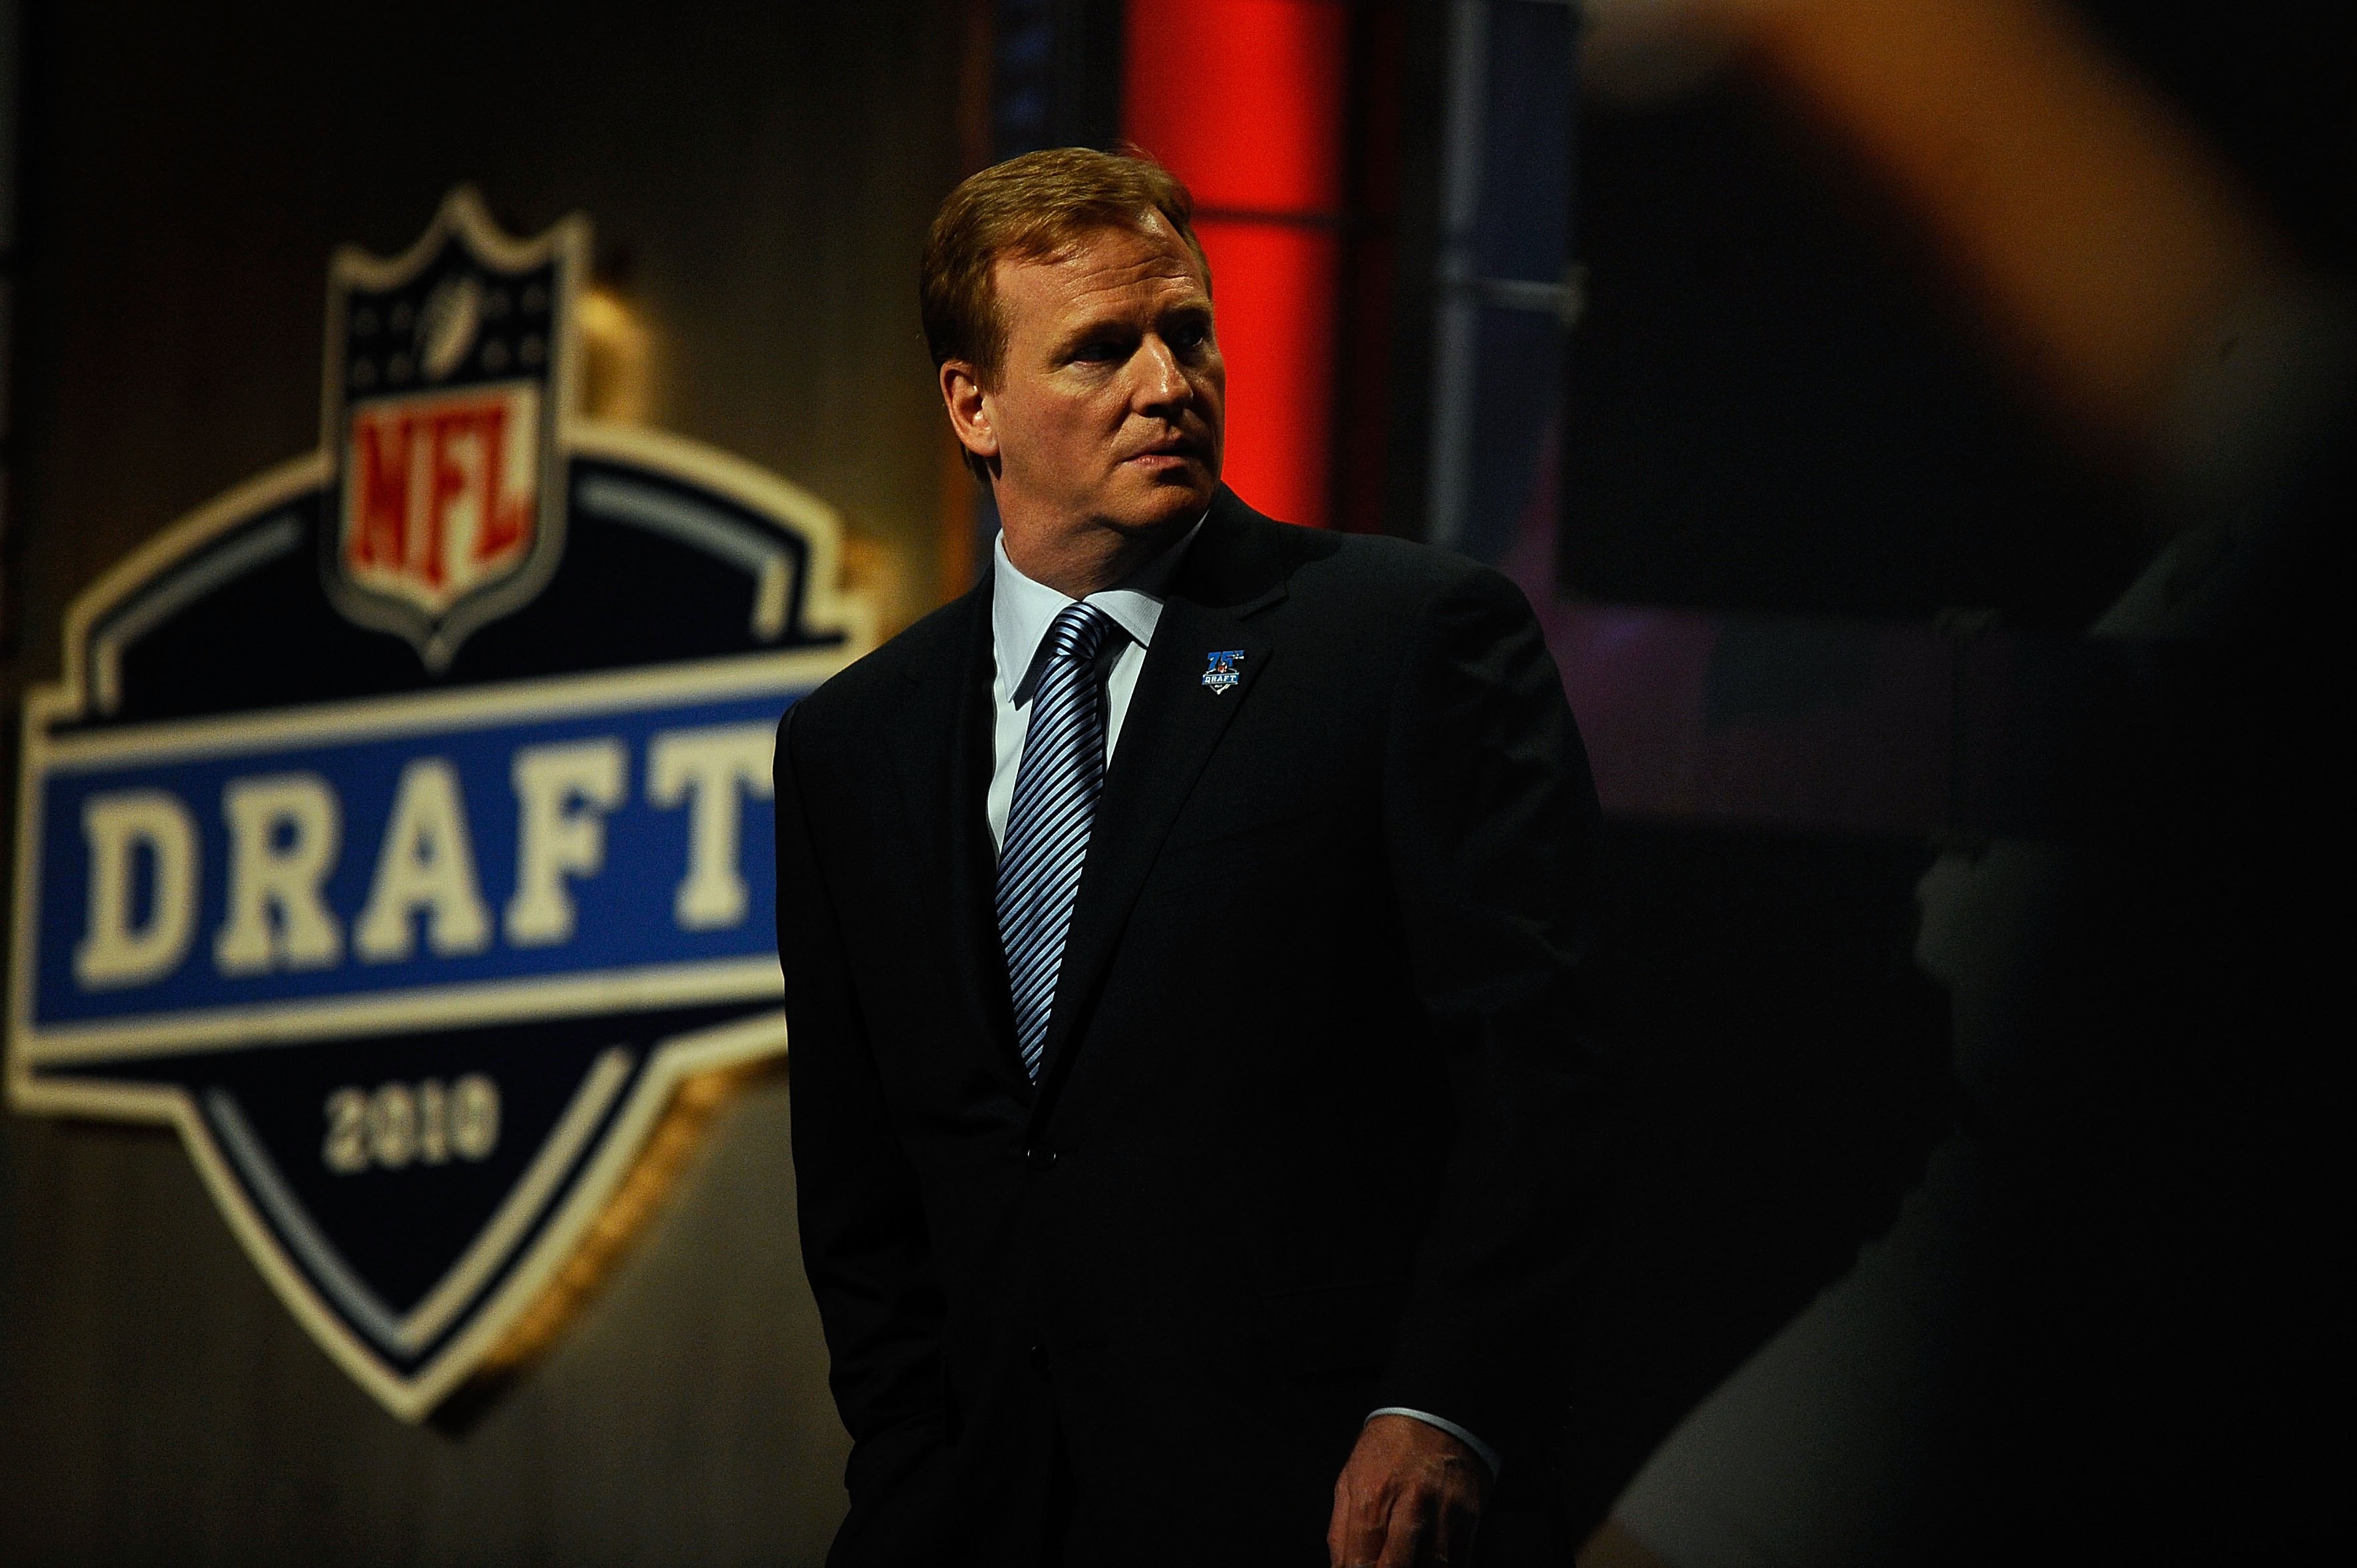 NEW YORK - APRIL 22:  NFL Commissioner Roger Goodell looks on as he stands on stage during the first round of the 2010 NFL Draft at Radio City Music Hall on April 22, 2010 in New York City.  (Photo by Jeff Zelevansky/Getty Images)